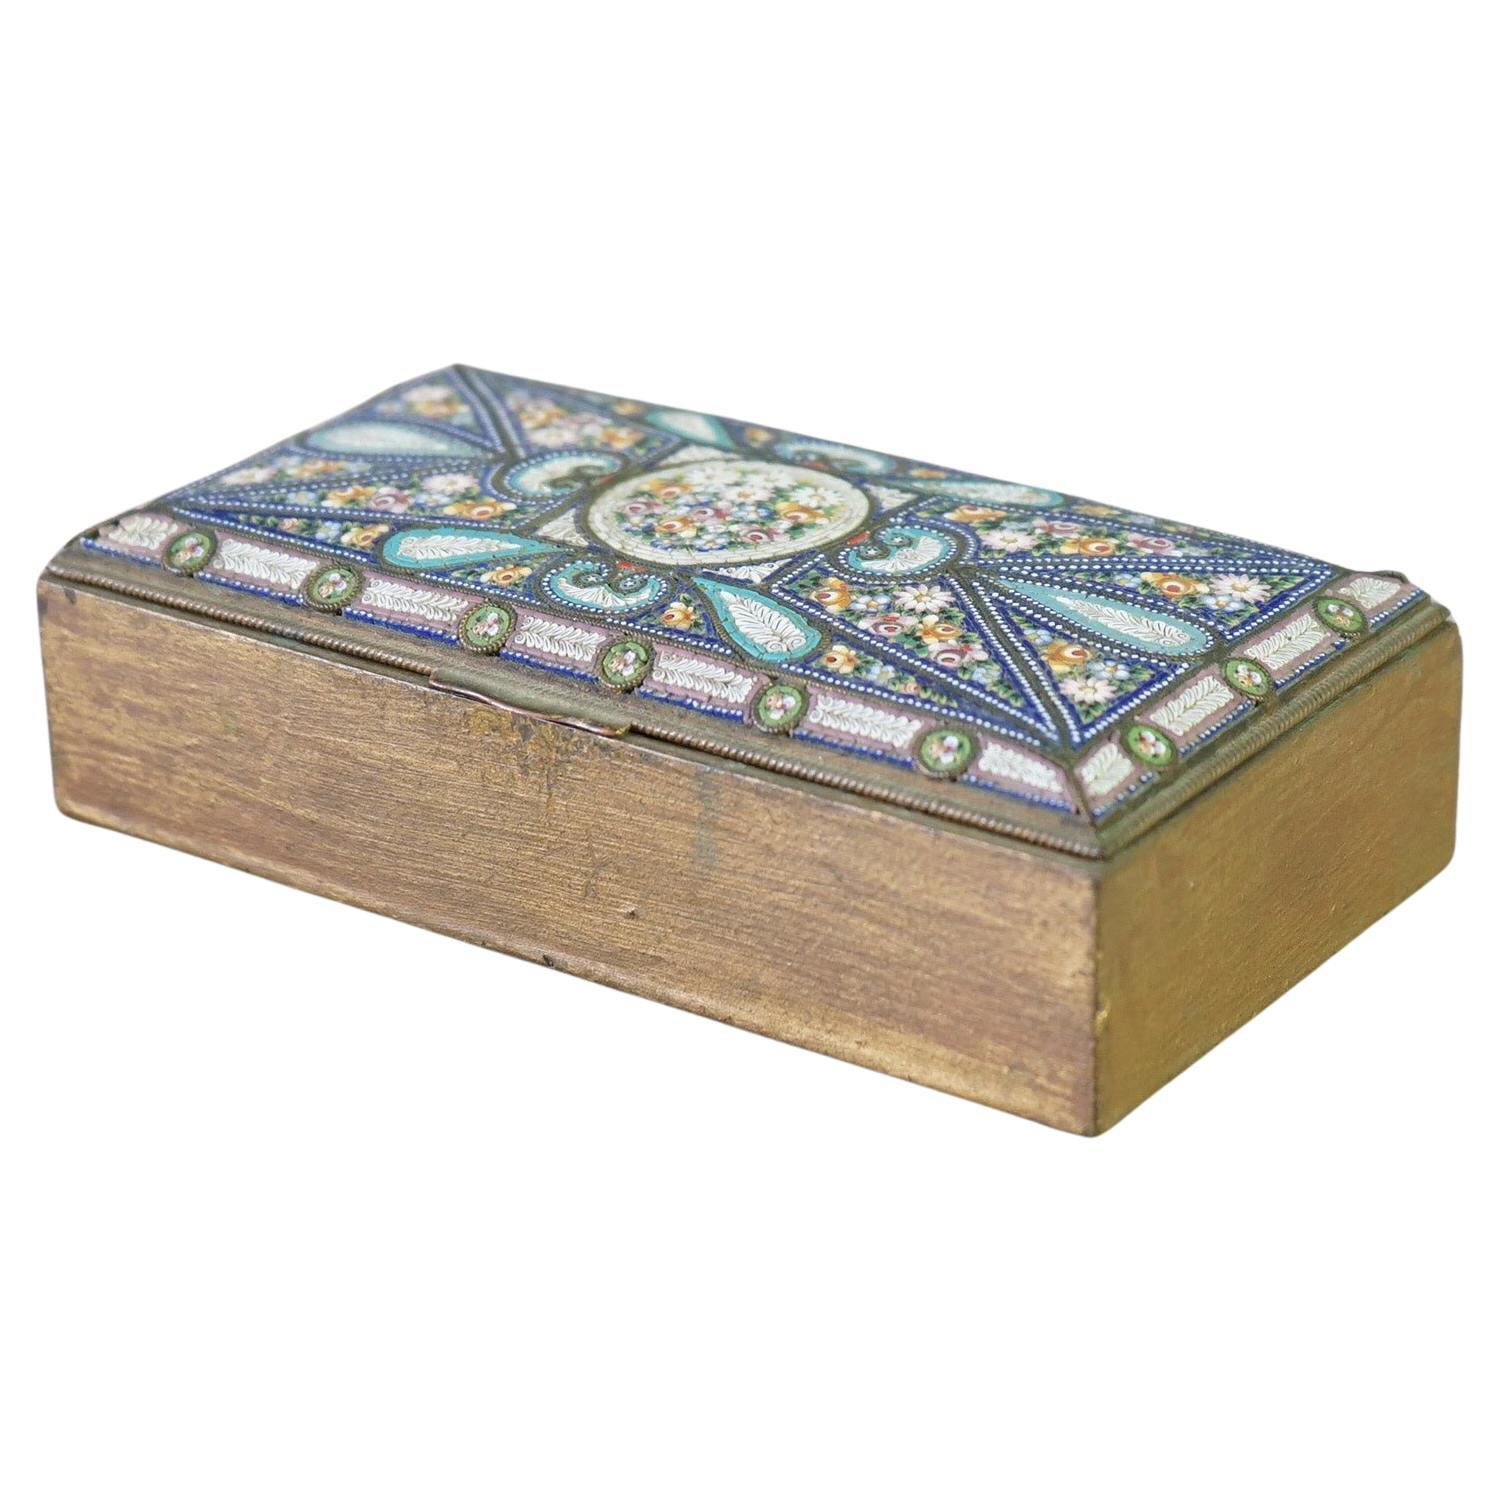 An antique dresser box offers bronze construction with micro mosaic top having floral decoration, 19th century

Measures - 3.25